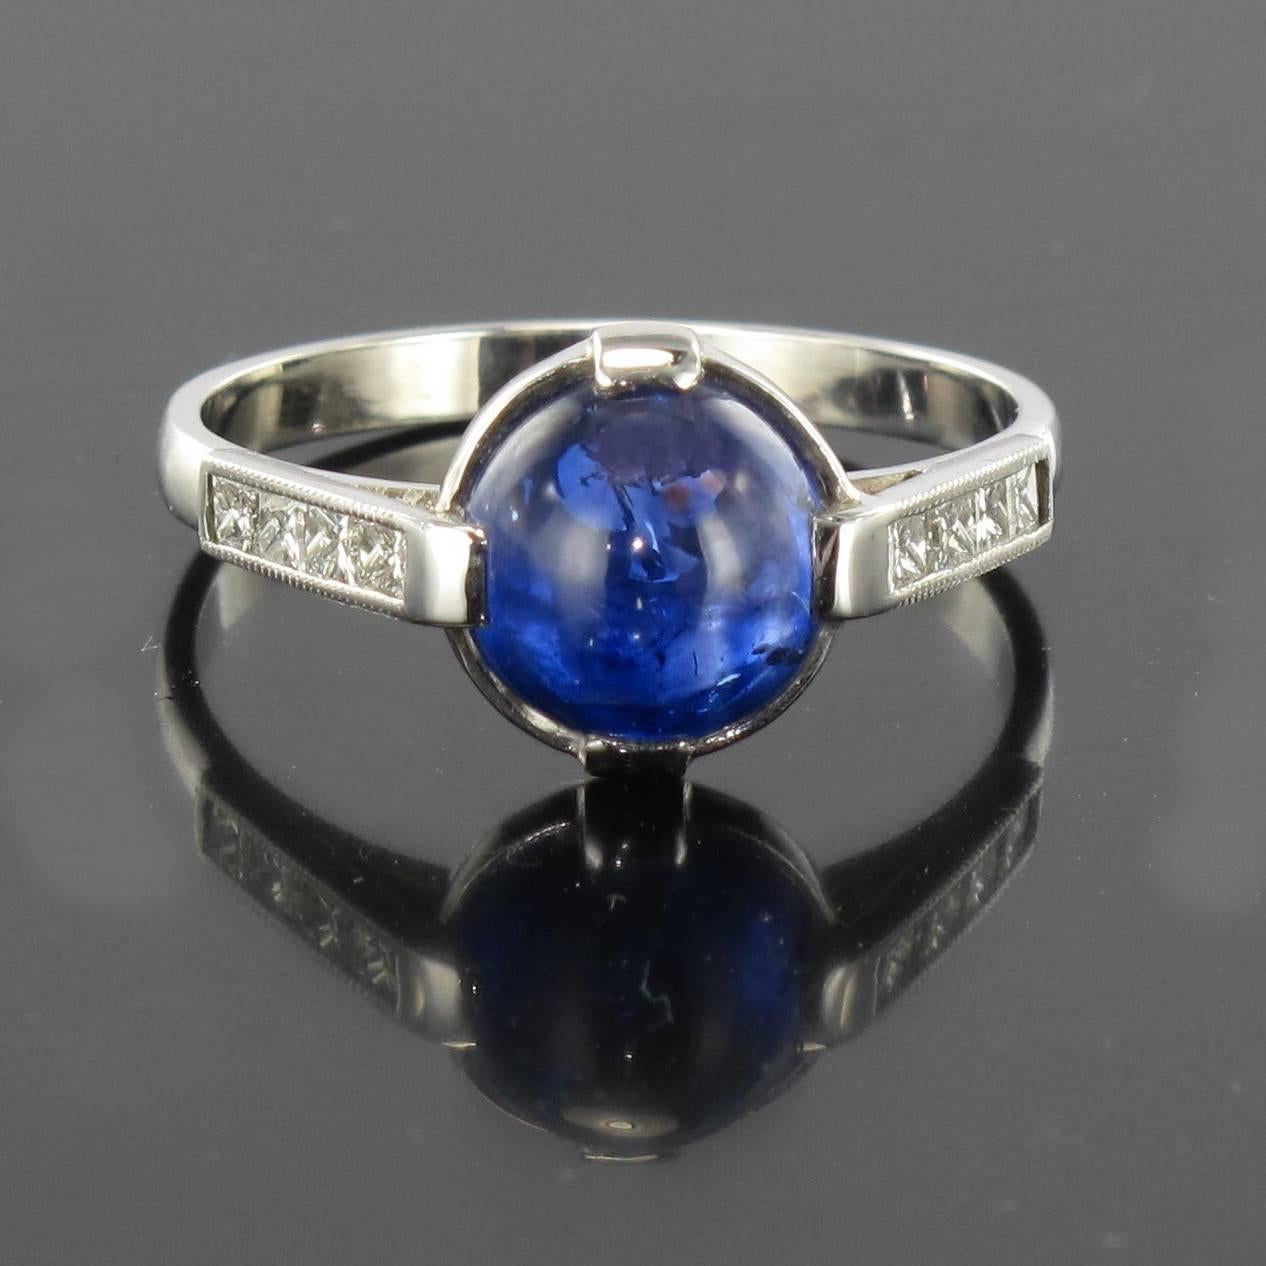 Baume creation - modern ring - Unique piece.
Ring in 18 karat white gold. 
This ravishing round sapphire ring was inspired by the Art Deco style. Featuring a central splendid sapphire cabochon of an intense deep blue set by 4 flat claws. The band